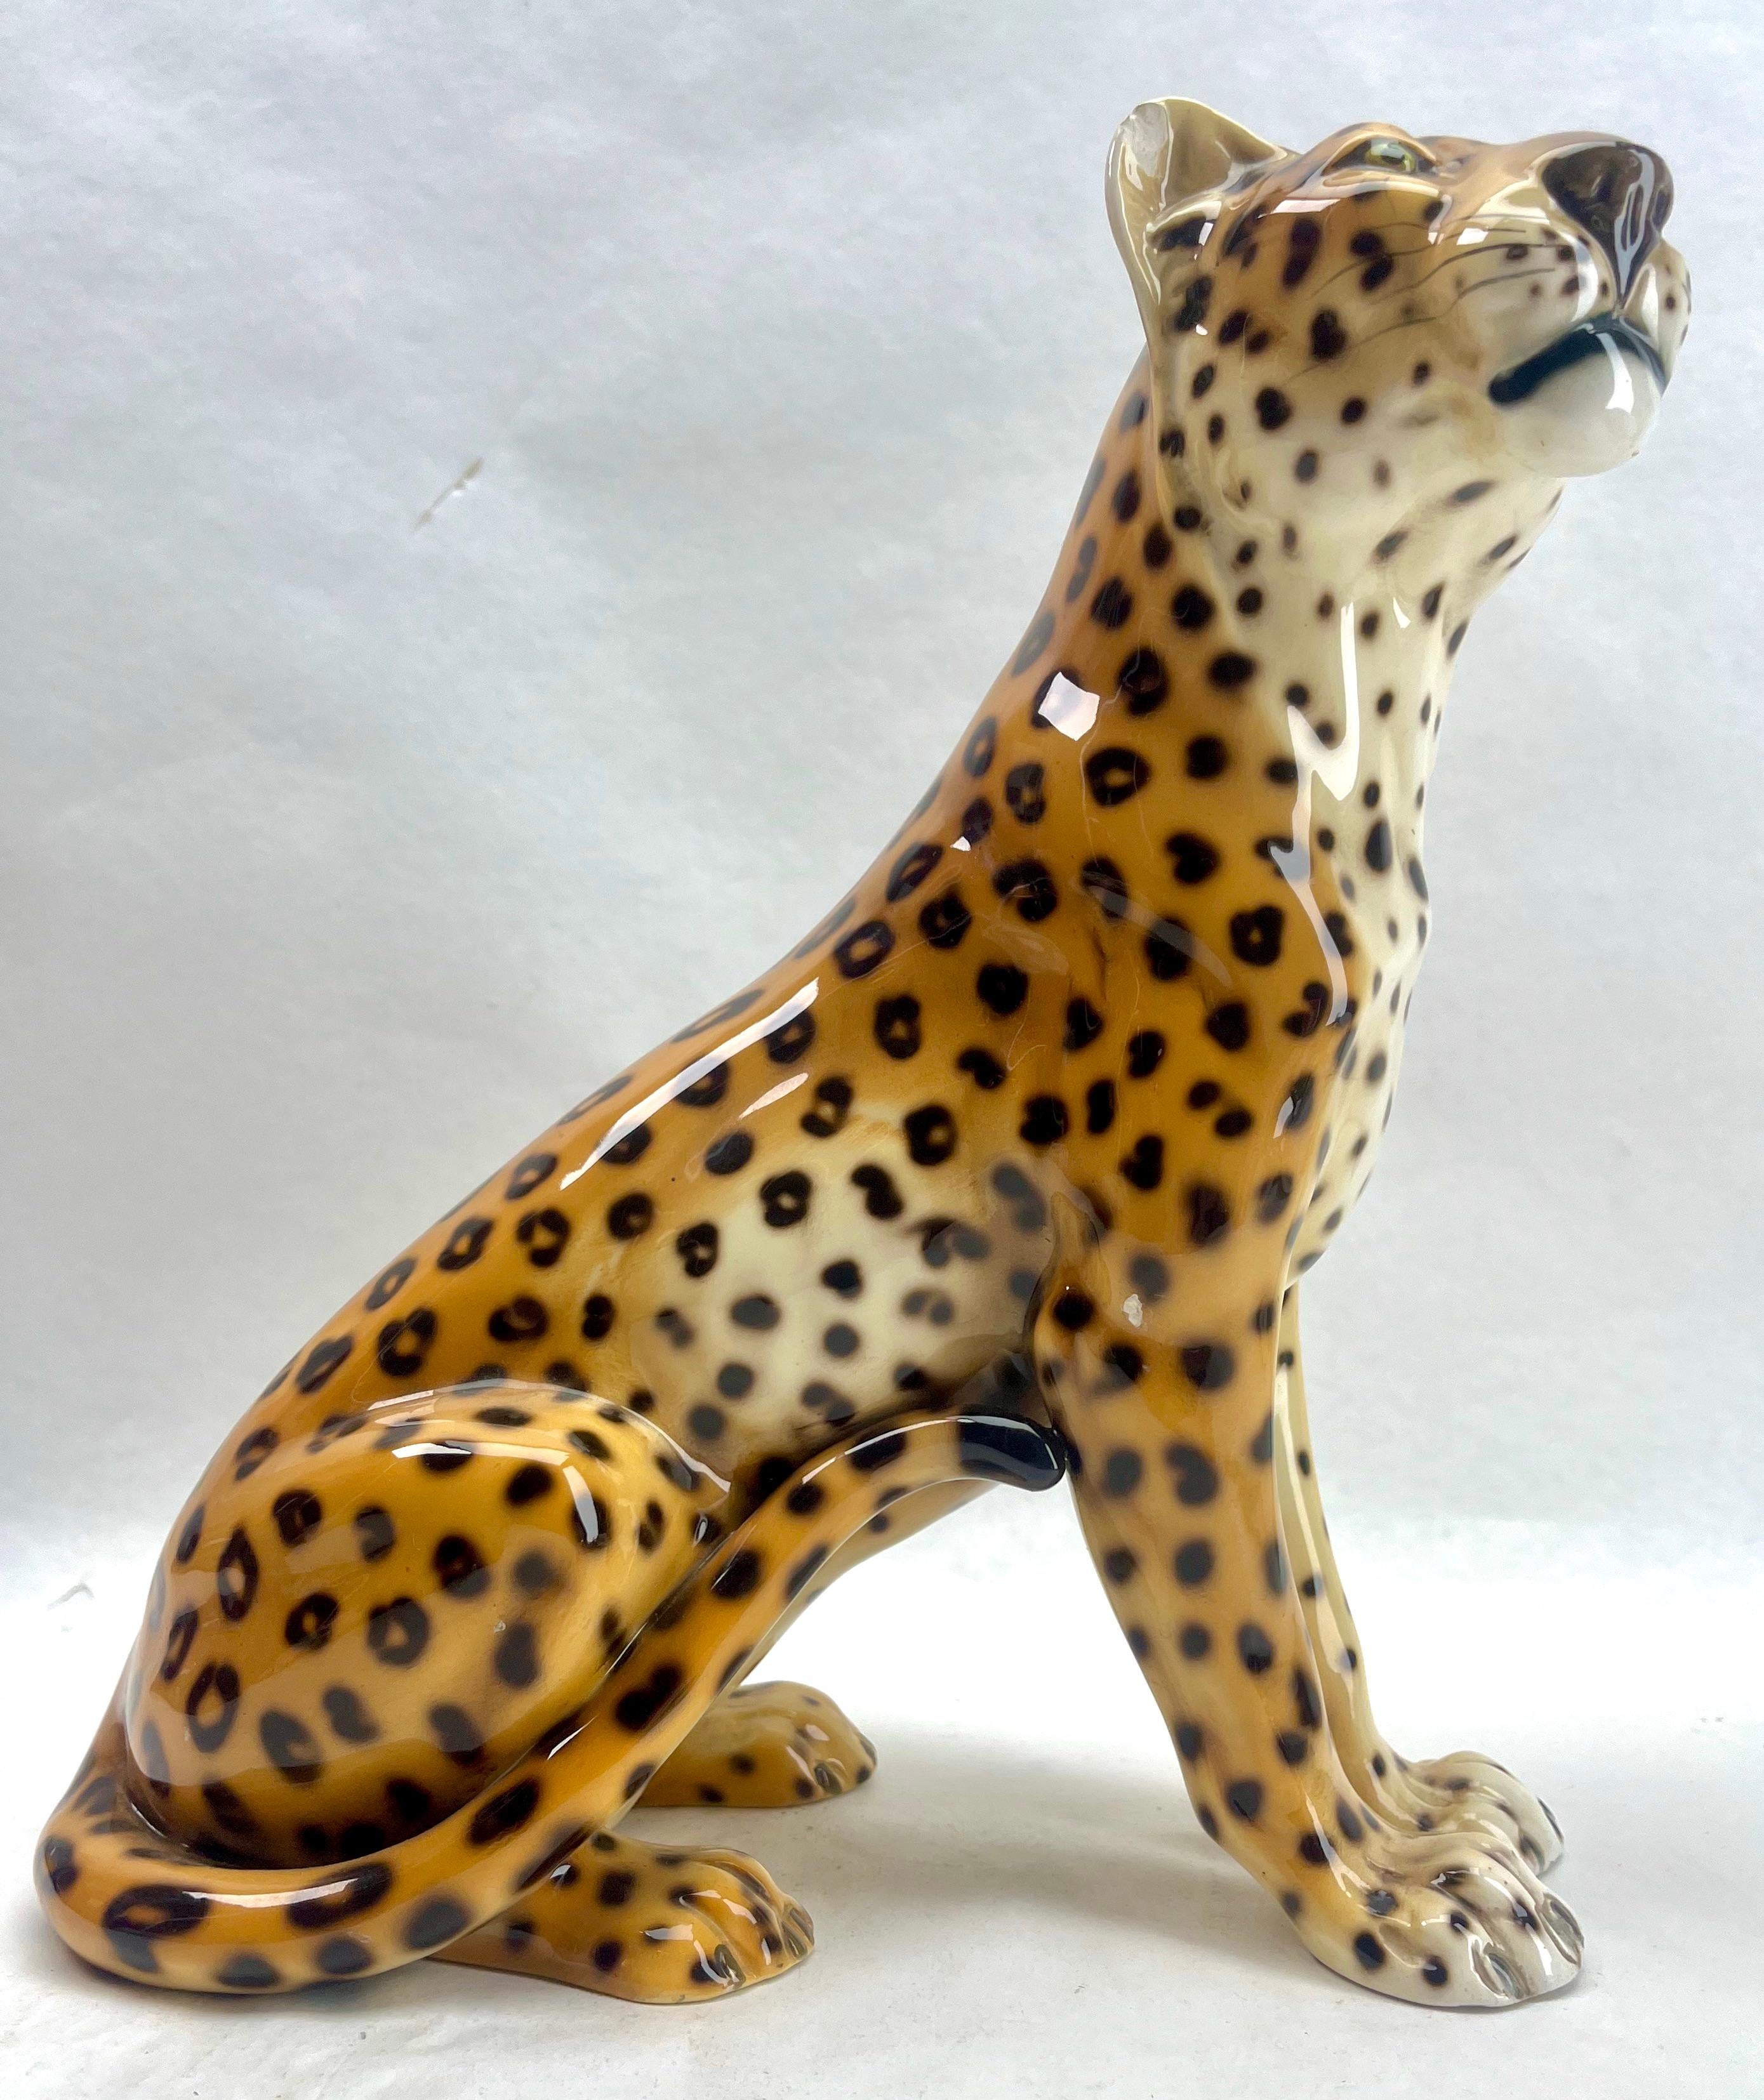 Stylish Ceramic Glazed Handpainted leopard Sculpture Ronzan Signed, Italy, 1950s For Sale 2